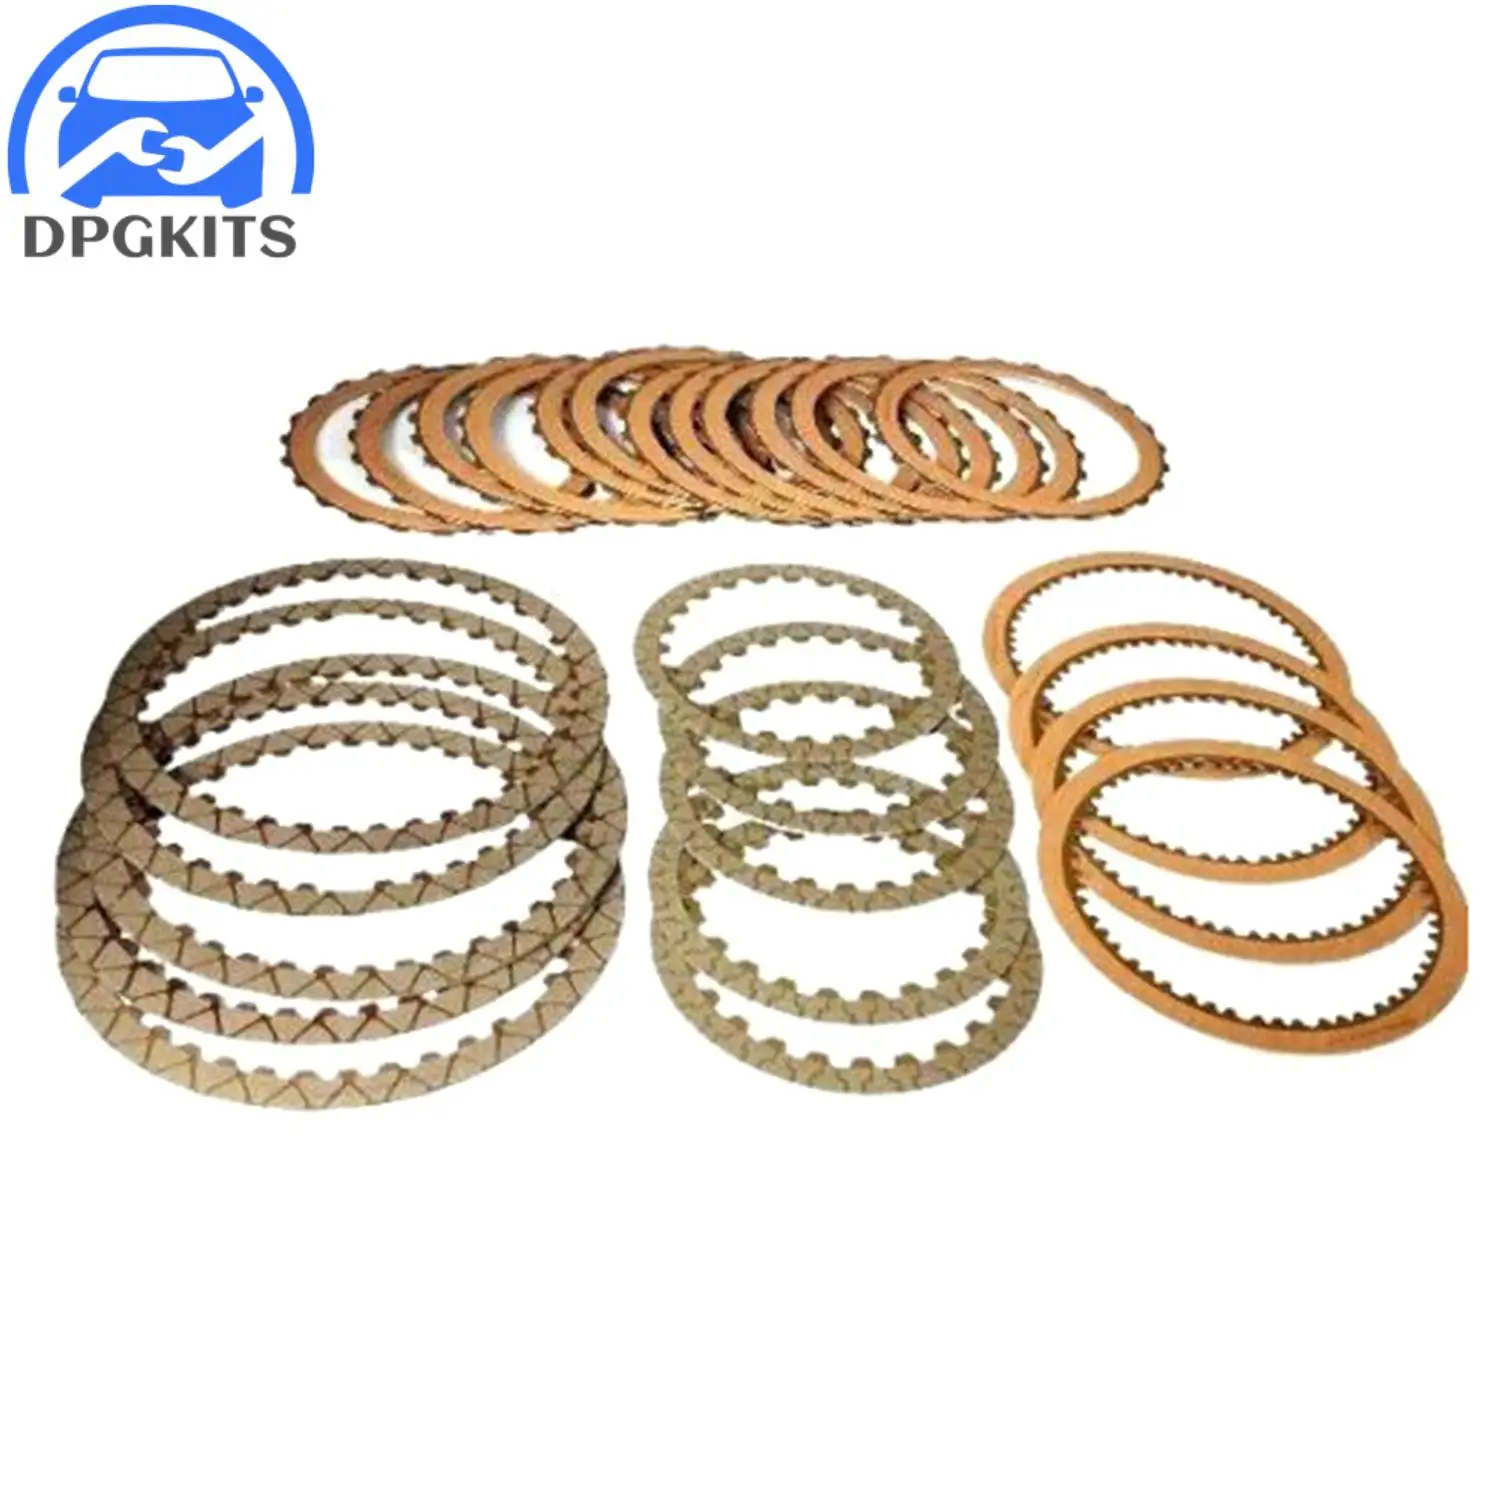 

8HP45 Transmission Clutch Friction Plate Kit For Q7 1 2 3 4 5 6 7 Series Chrysler 300 Barracuda Charger Durango Cherokee